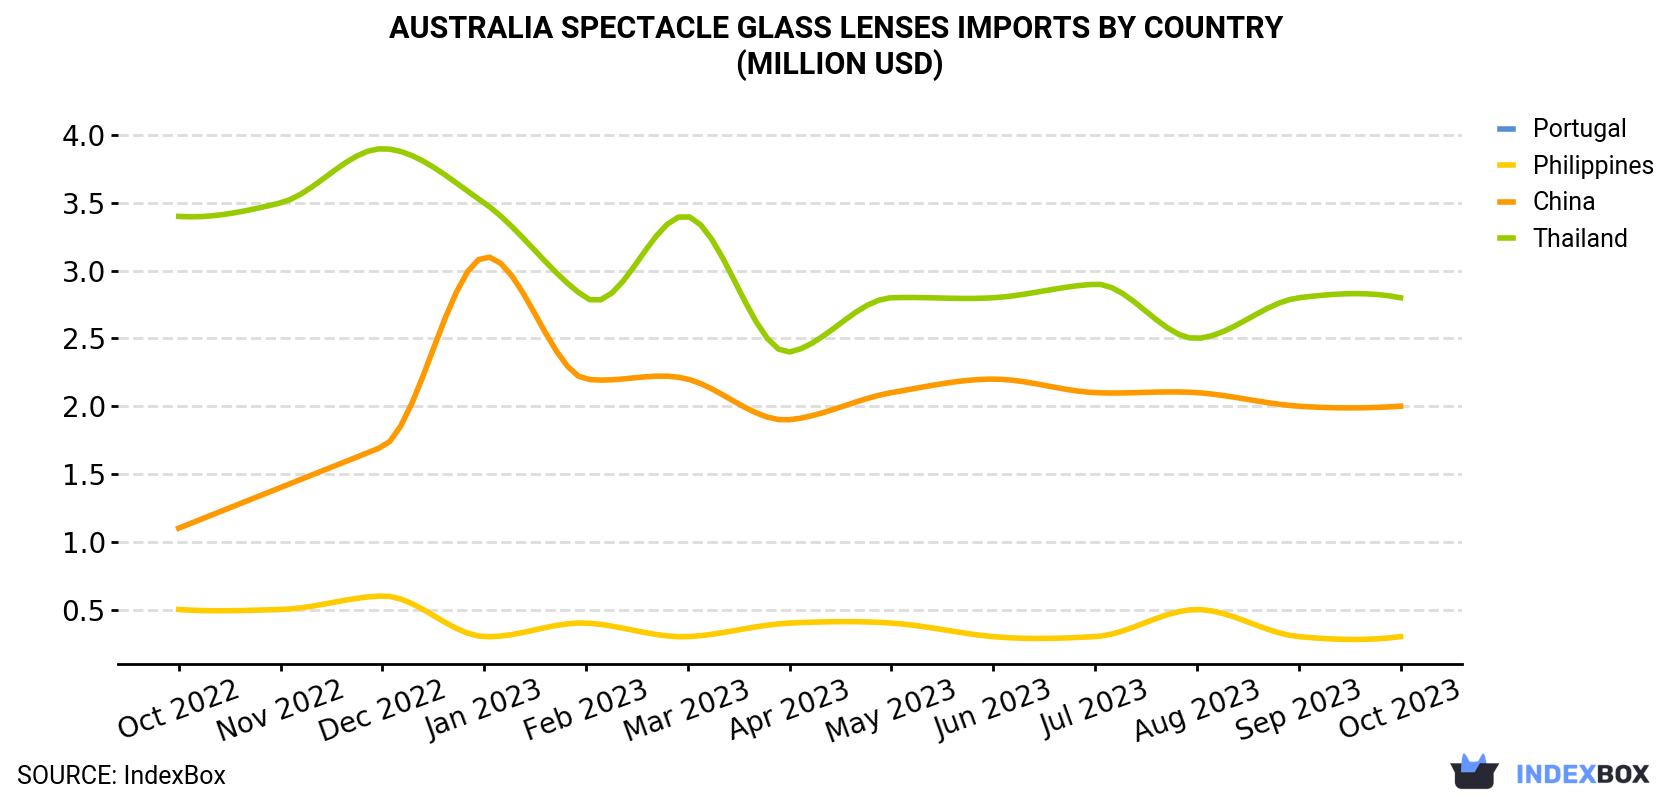 Australia Spectacle Glass Lenses Imports By Country (Million USD)